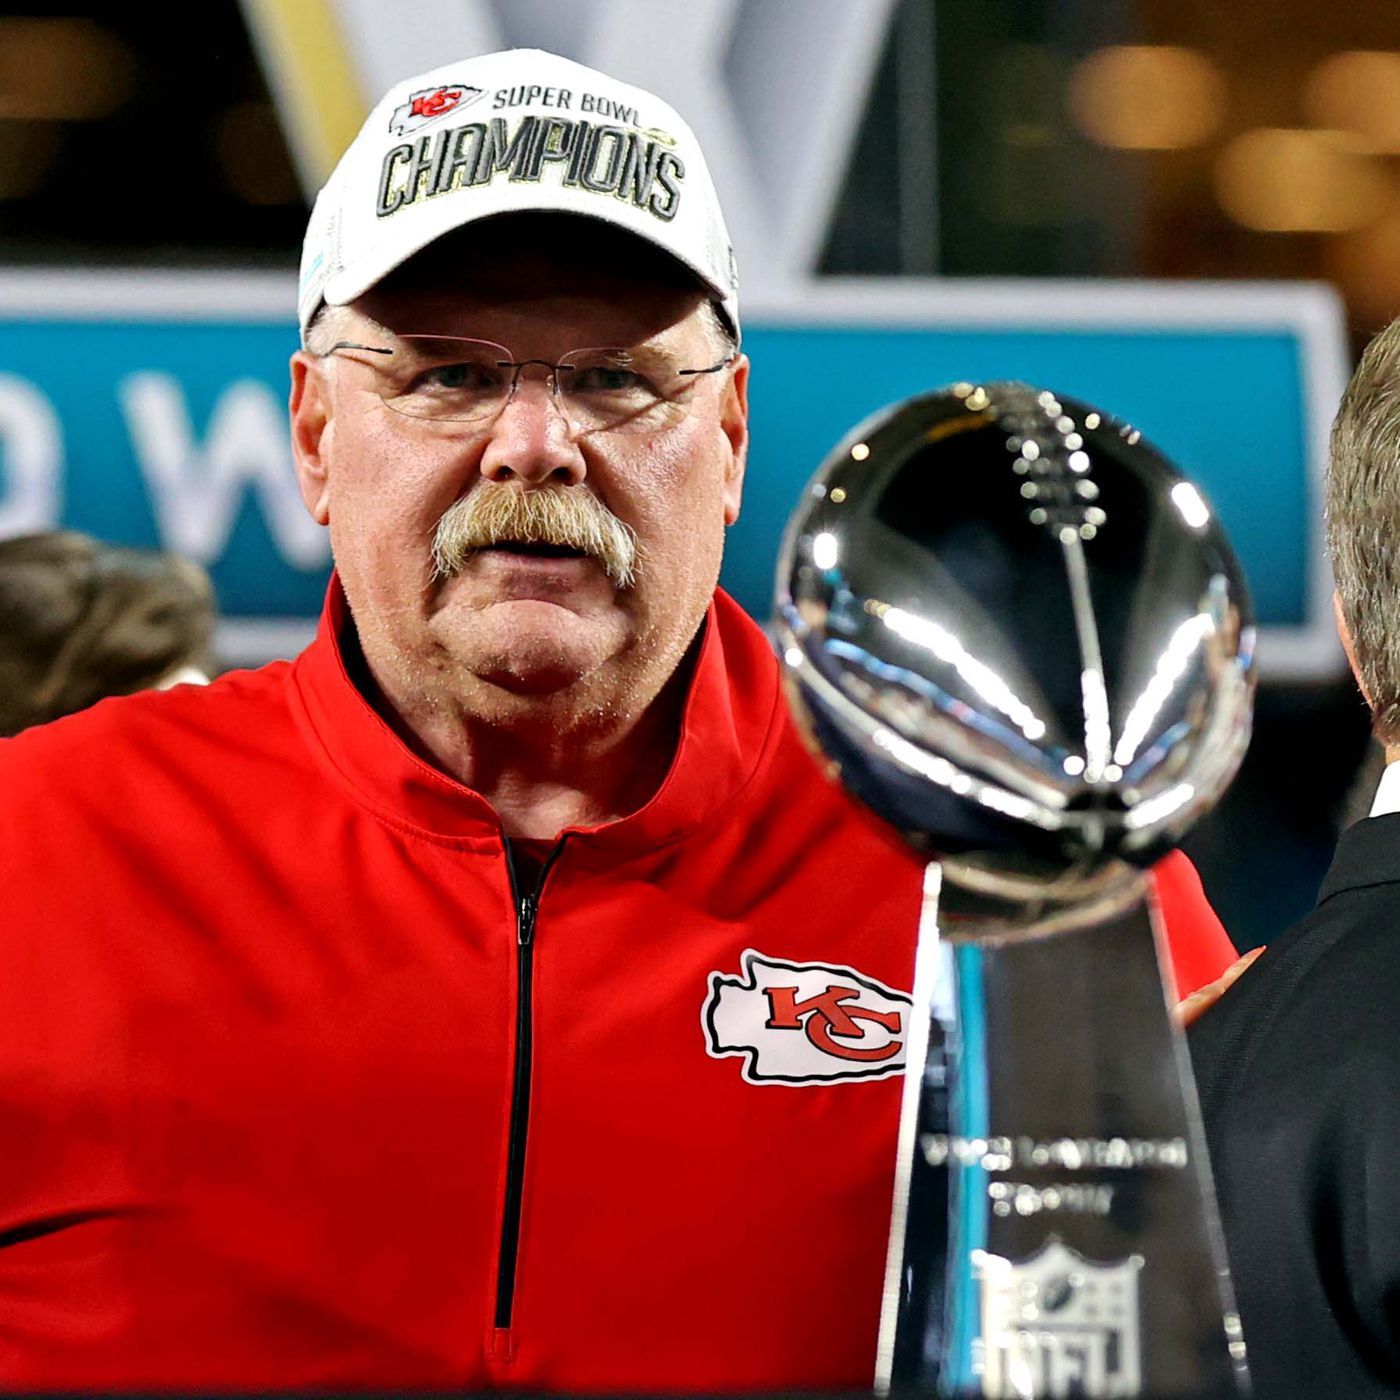 Andy Reid winning a Super Bowl means no one can again deny his legacy